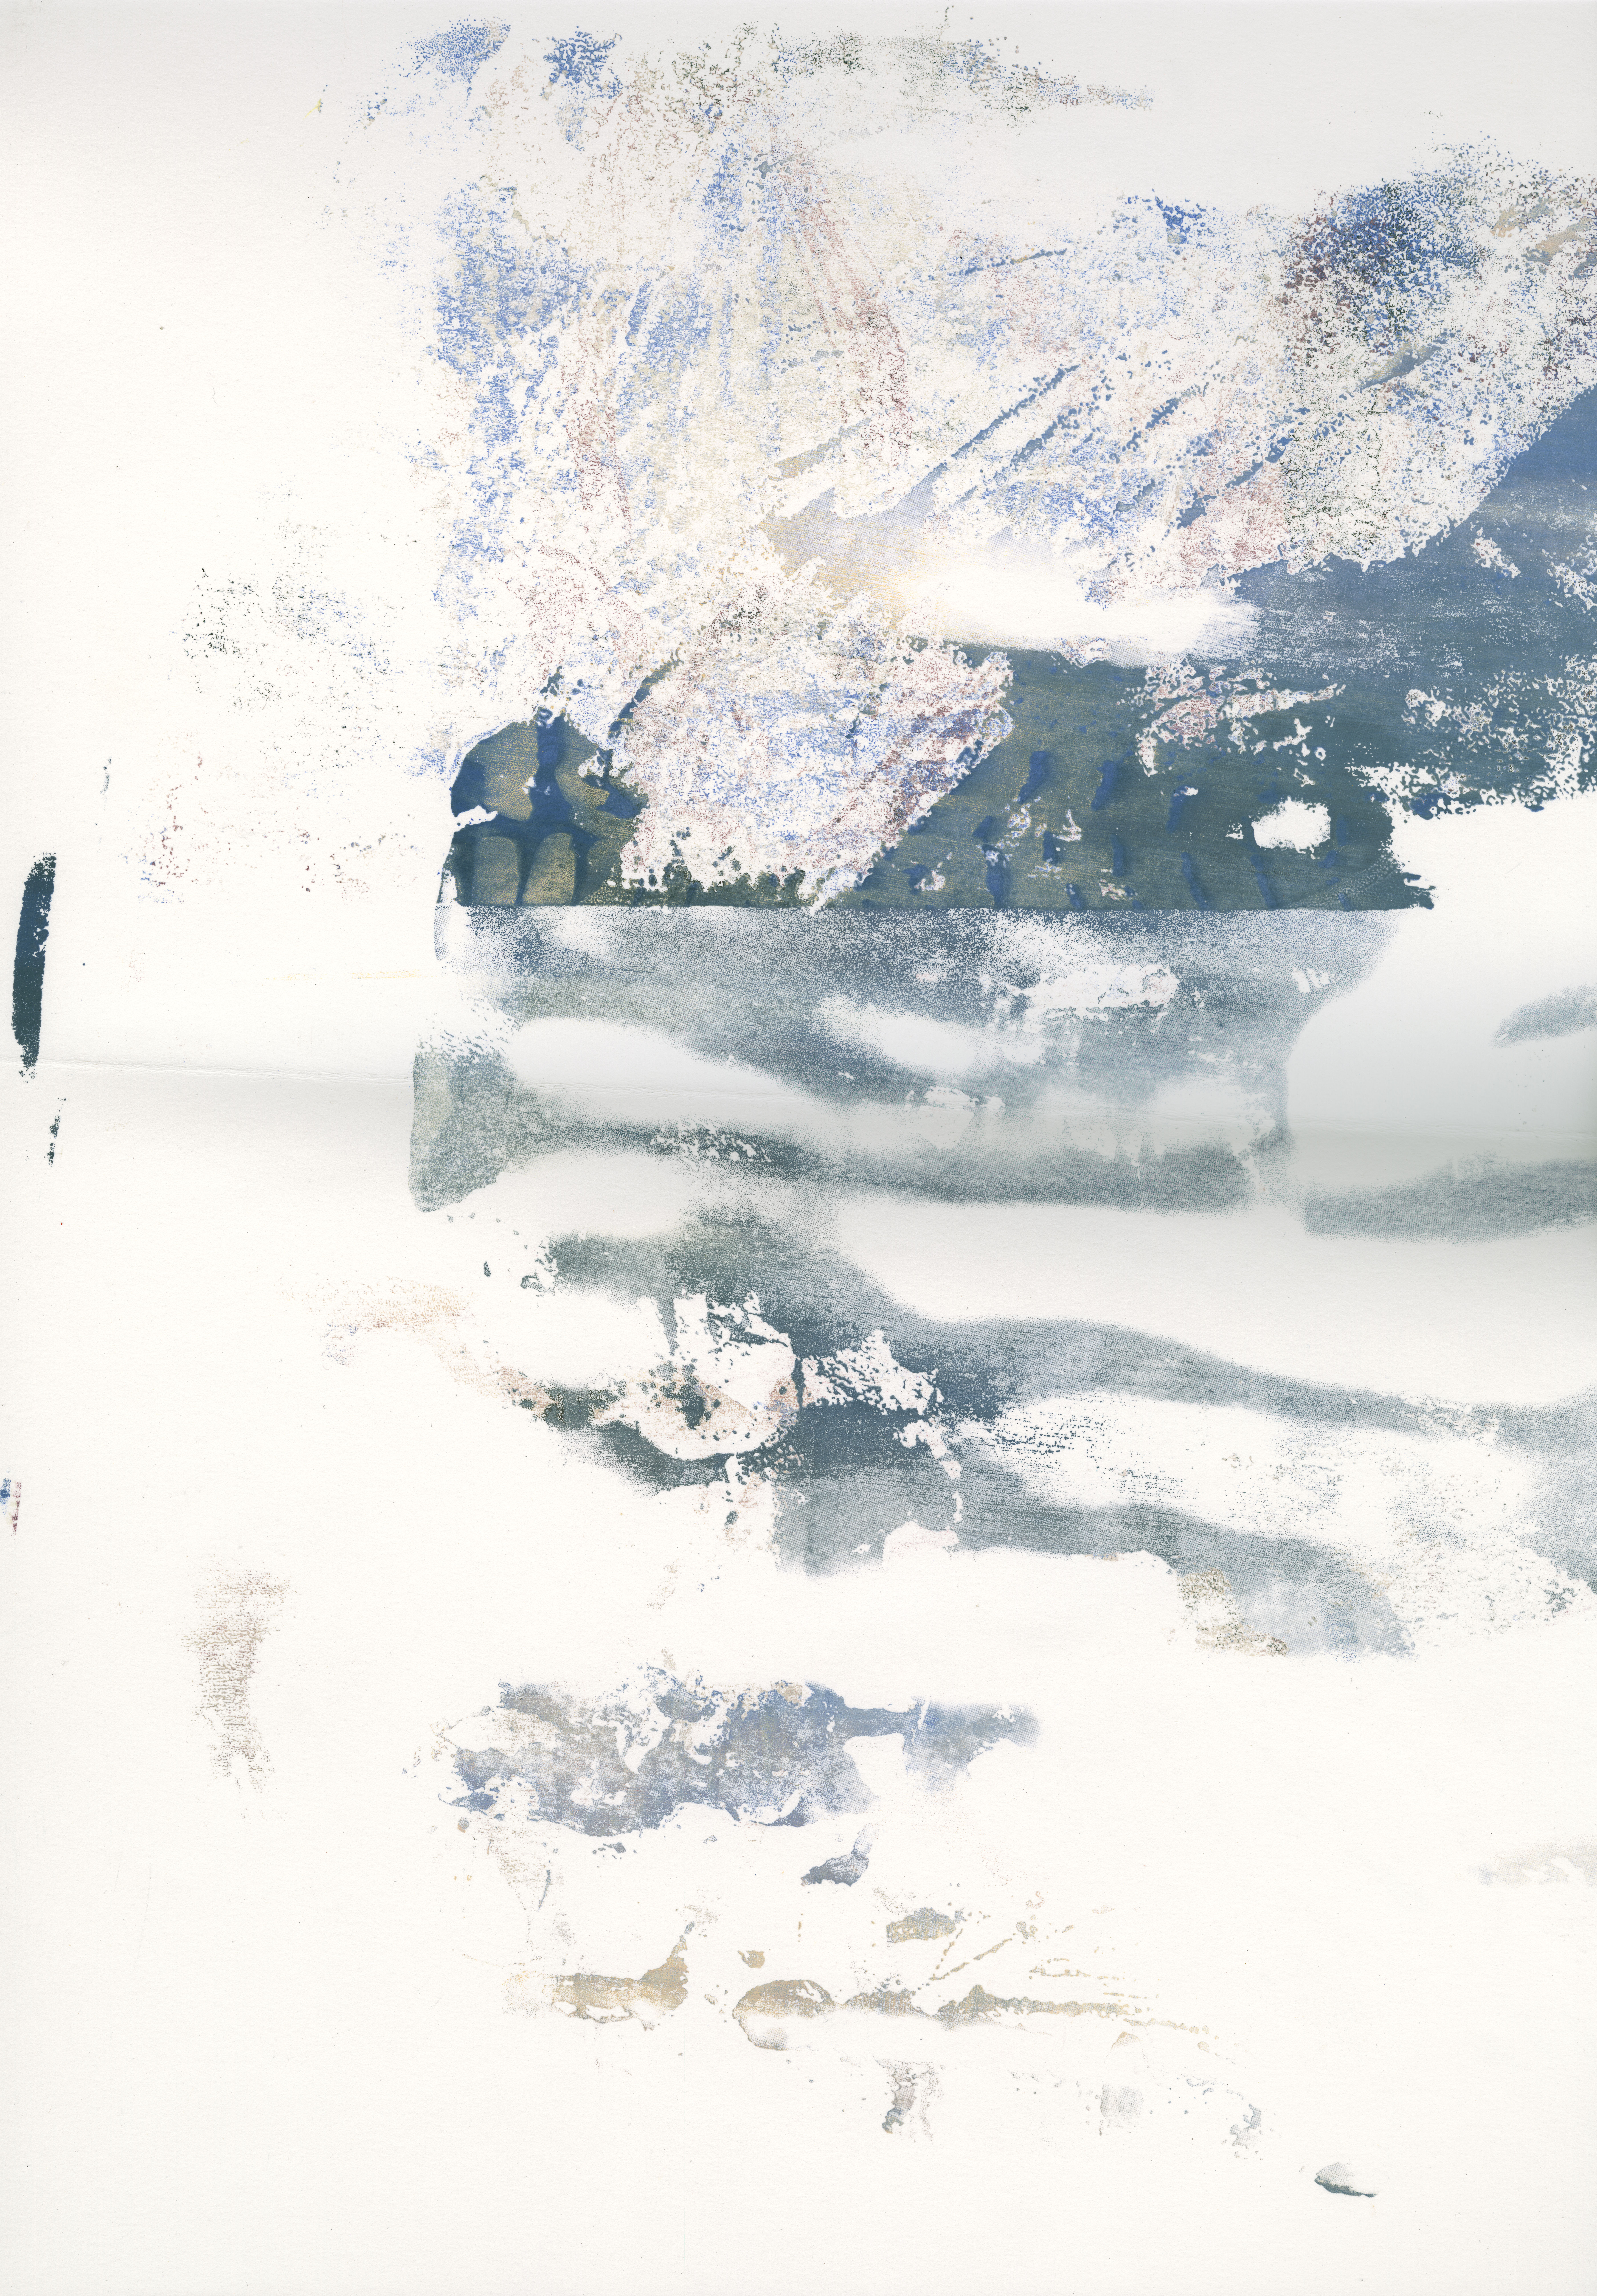 A photograph of a work on paper by artist Caroline Coolidge. The paper is white and is covered with abstract, textural marks that are layered and varying shades of blue.